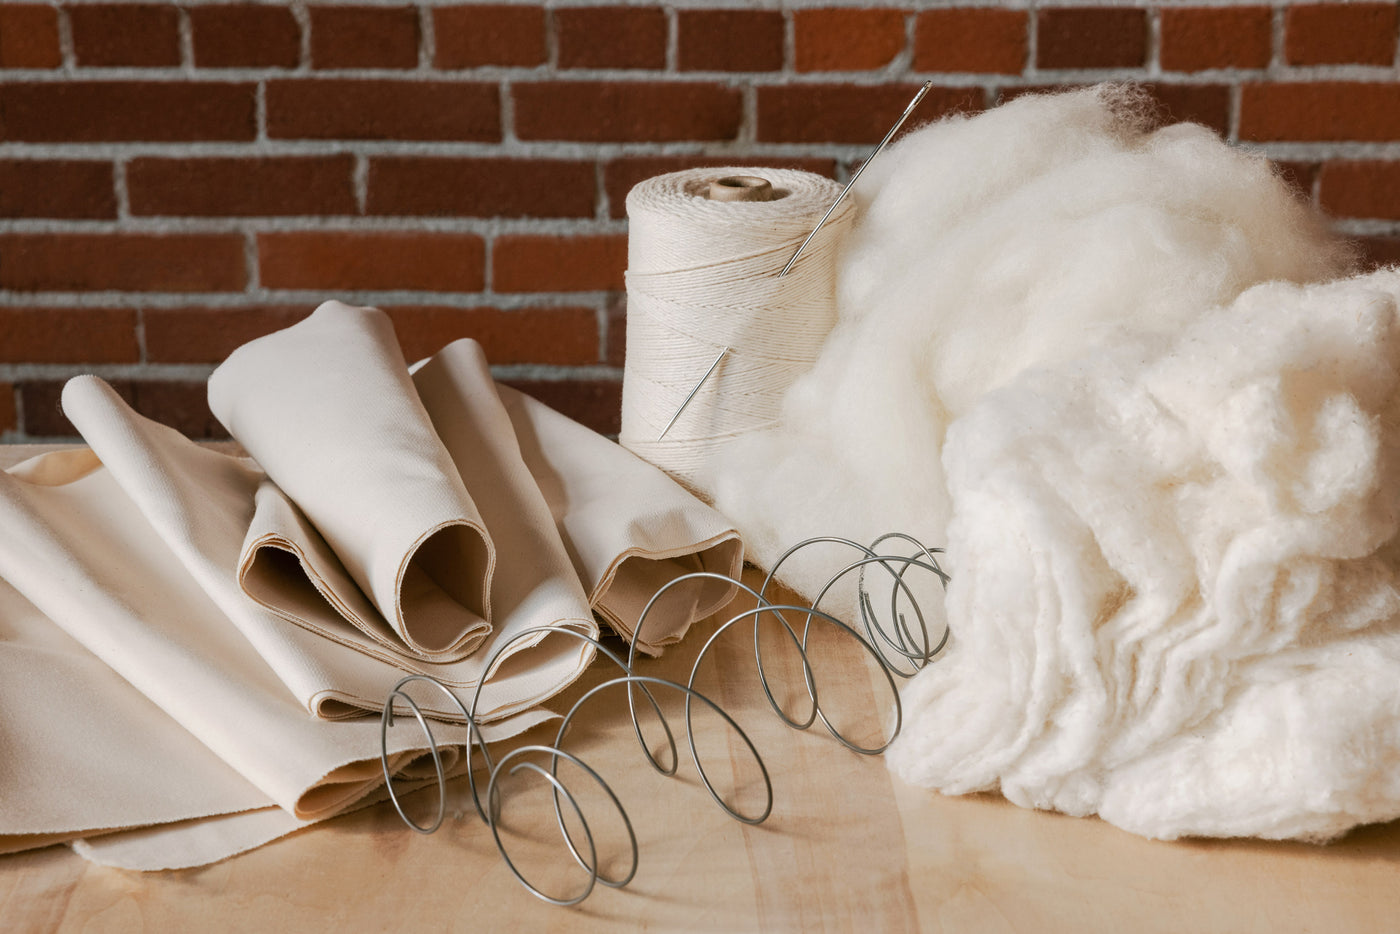 Natural materials of Suffolk spring mattress including wool, cotton, organic cotton fabric, and pocket coil spring